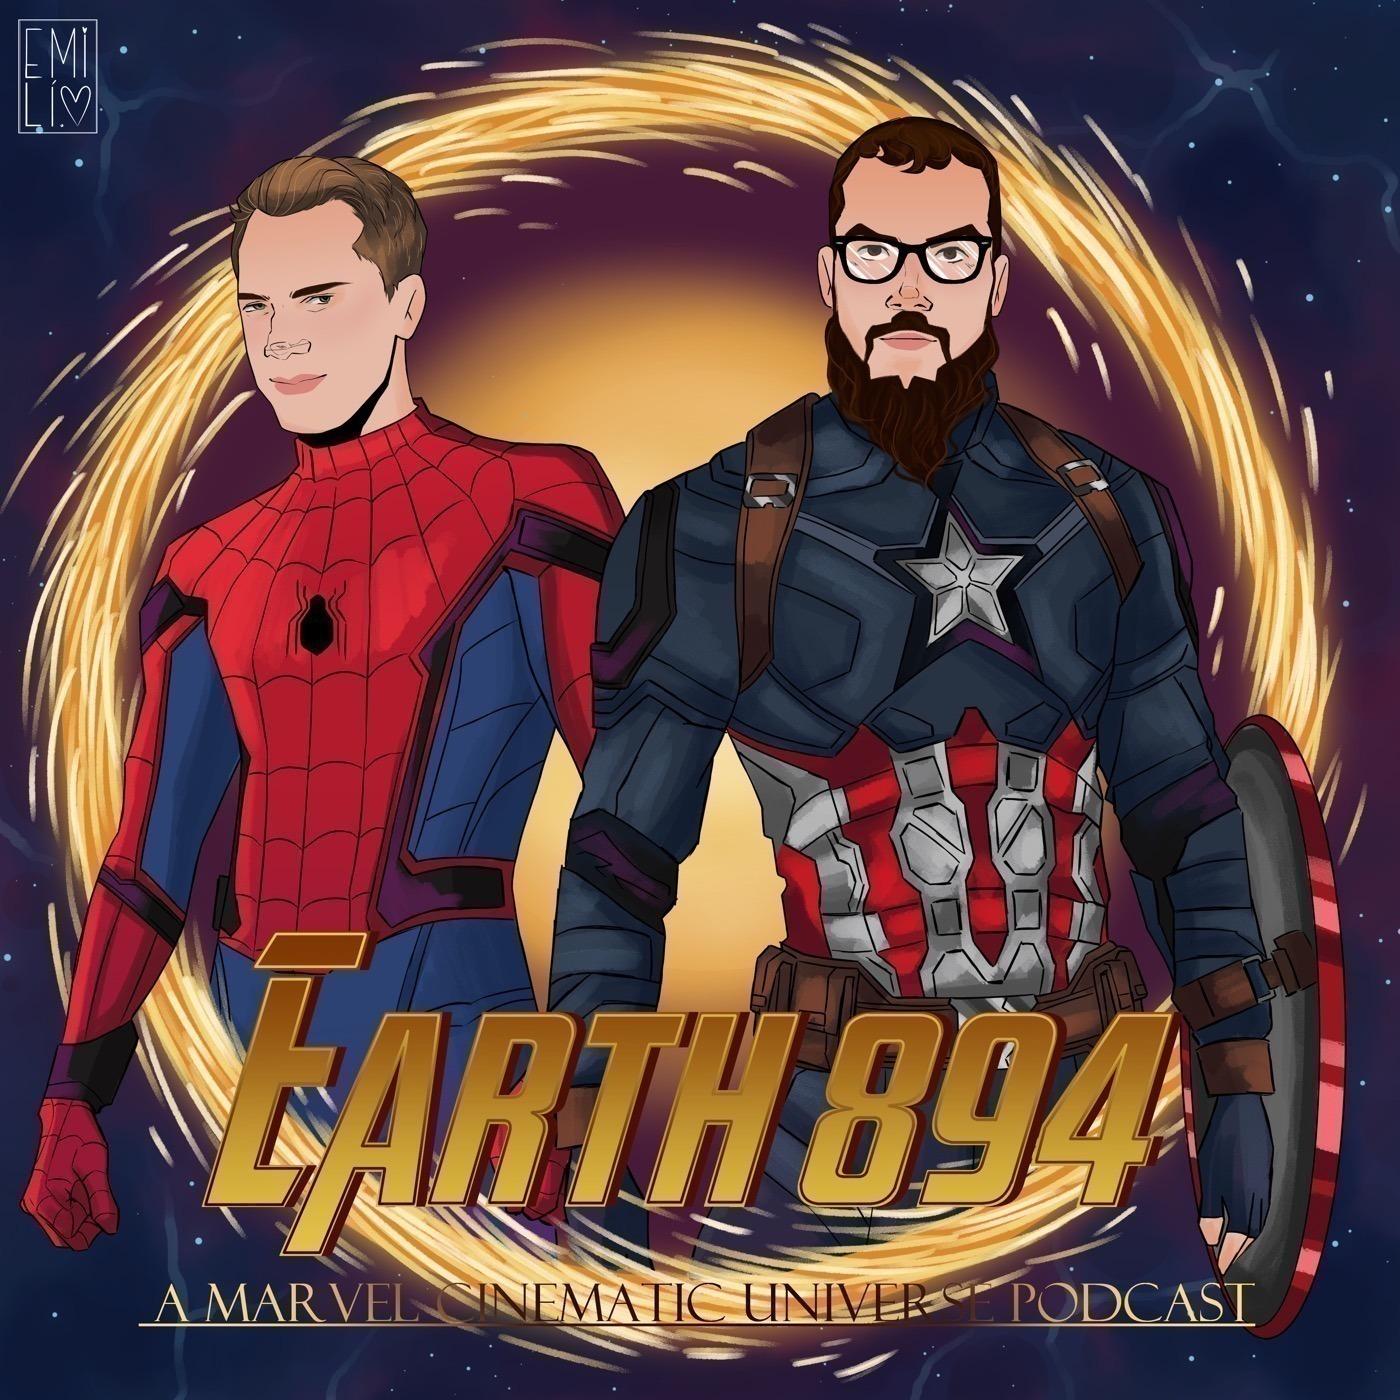 Earth 894: A Marvel Podcast | Reviewing Loki and the Latest MCU News + Rumors